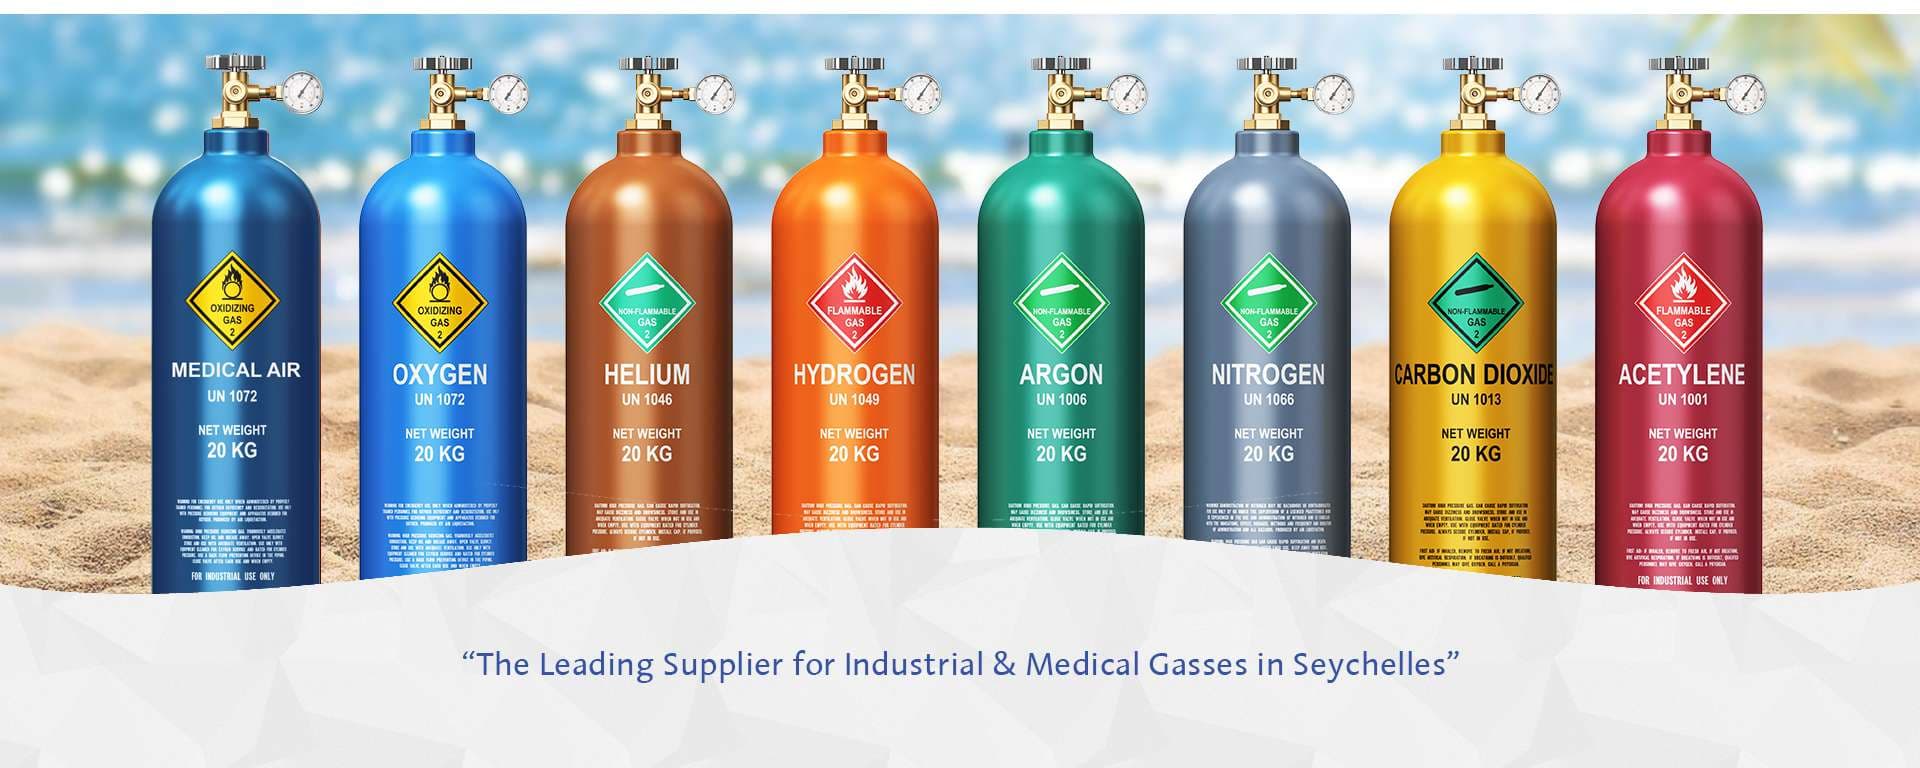 IMG - Industrial Medical Gases